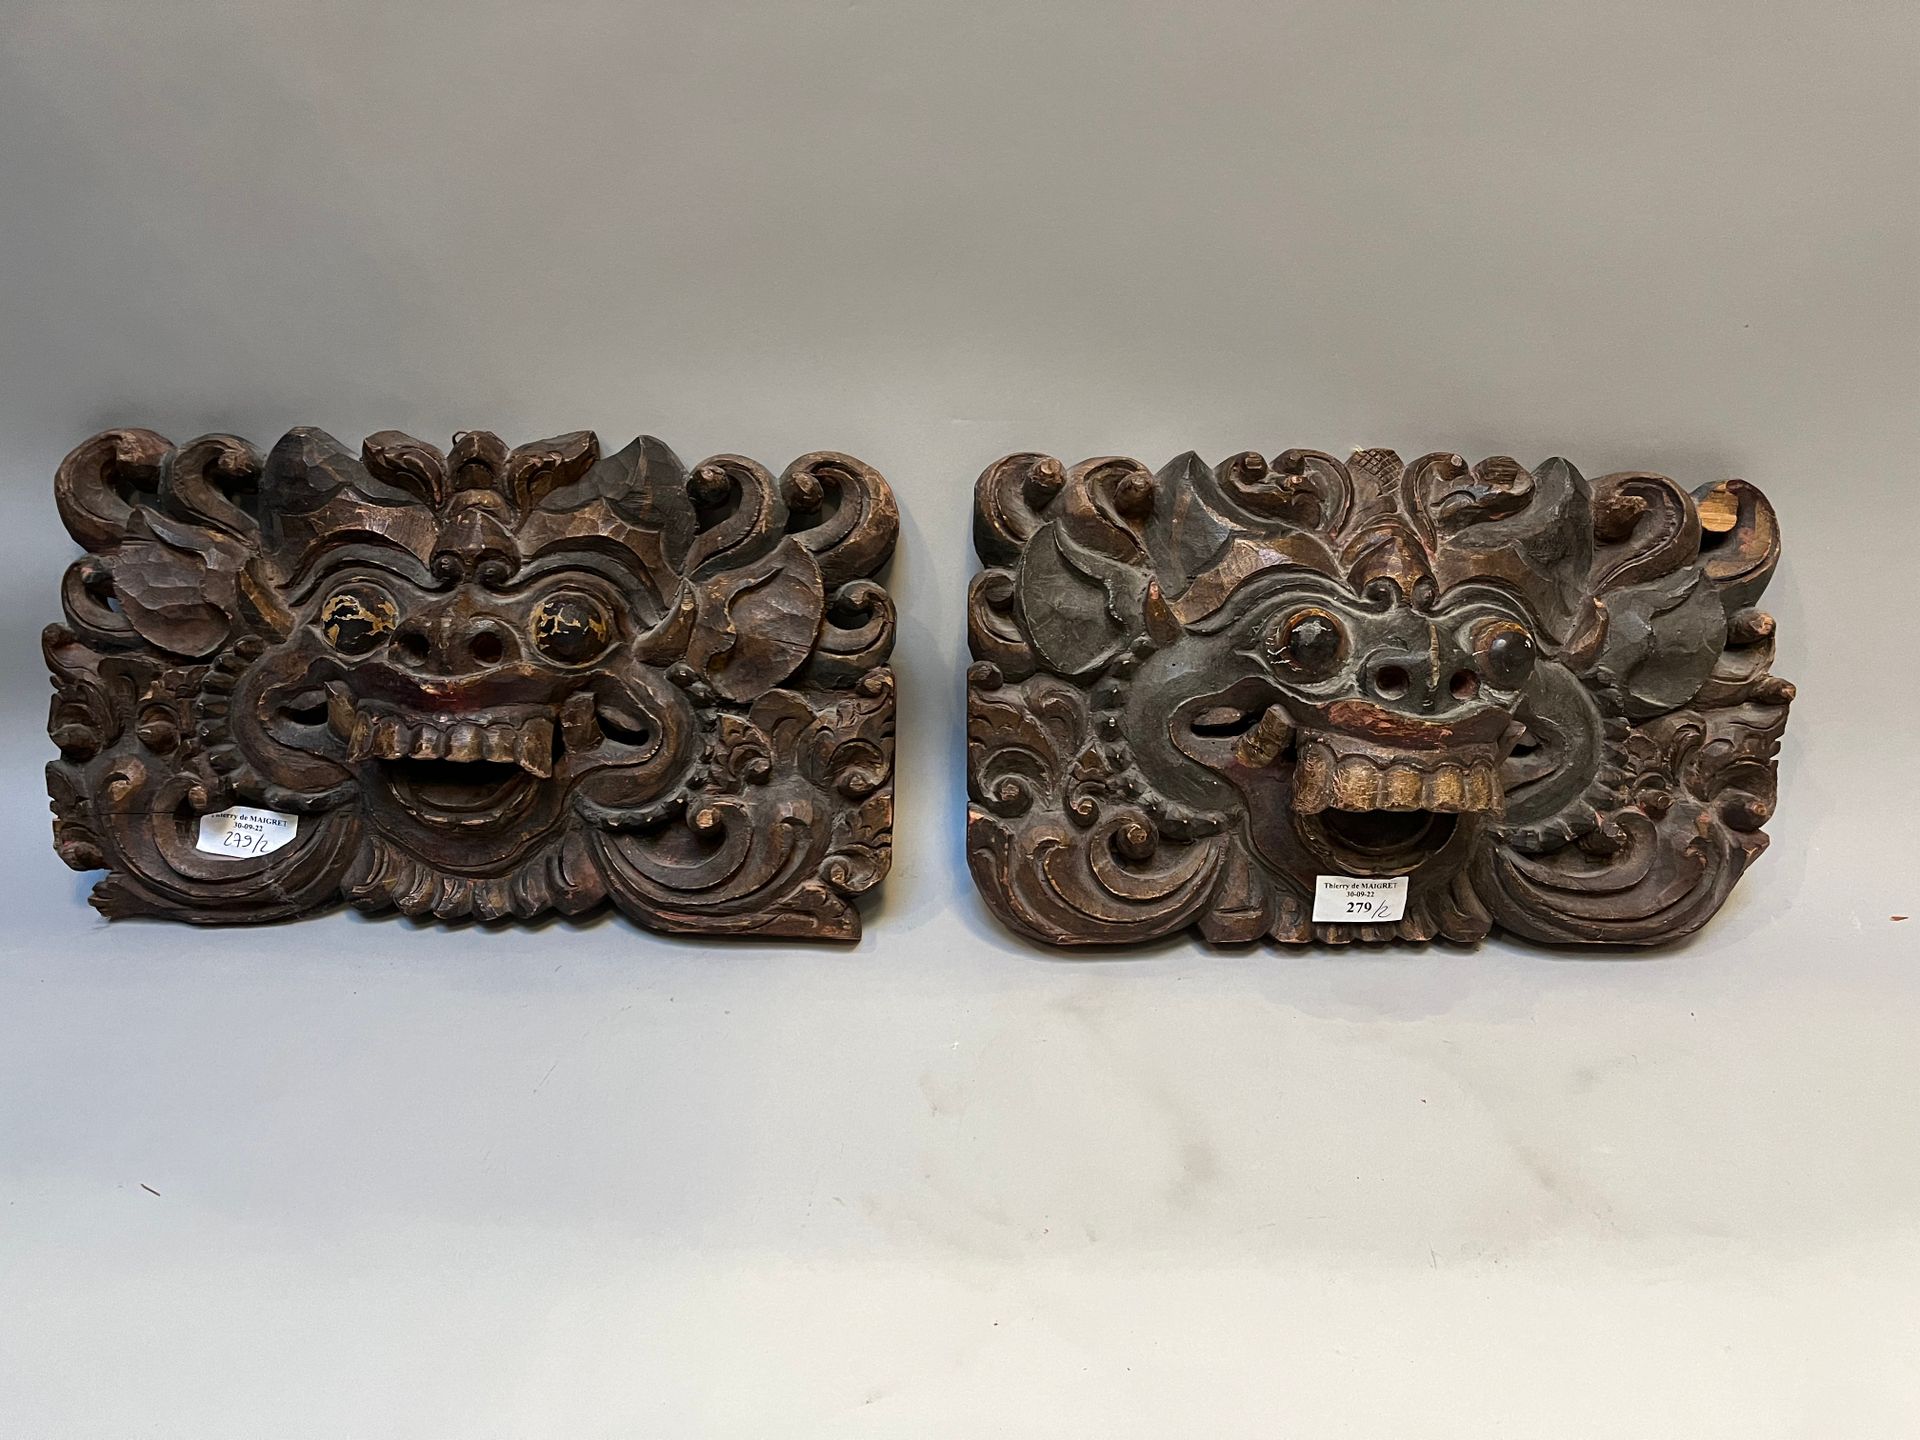 INDONÉSIE, Bali - XXe siècle Two carved wooden ornaments with traces of polychro&hellip;